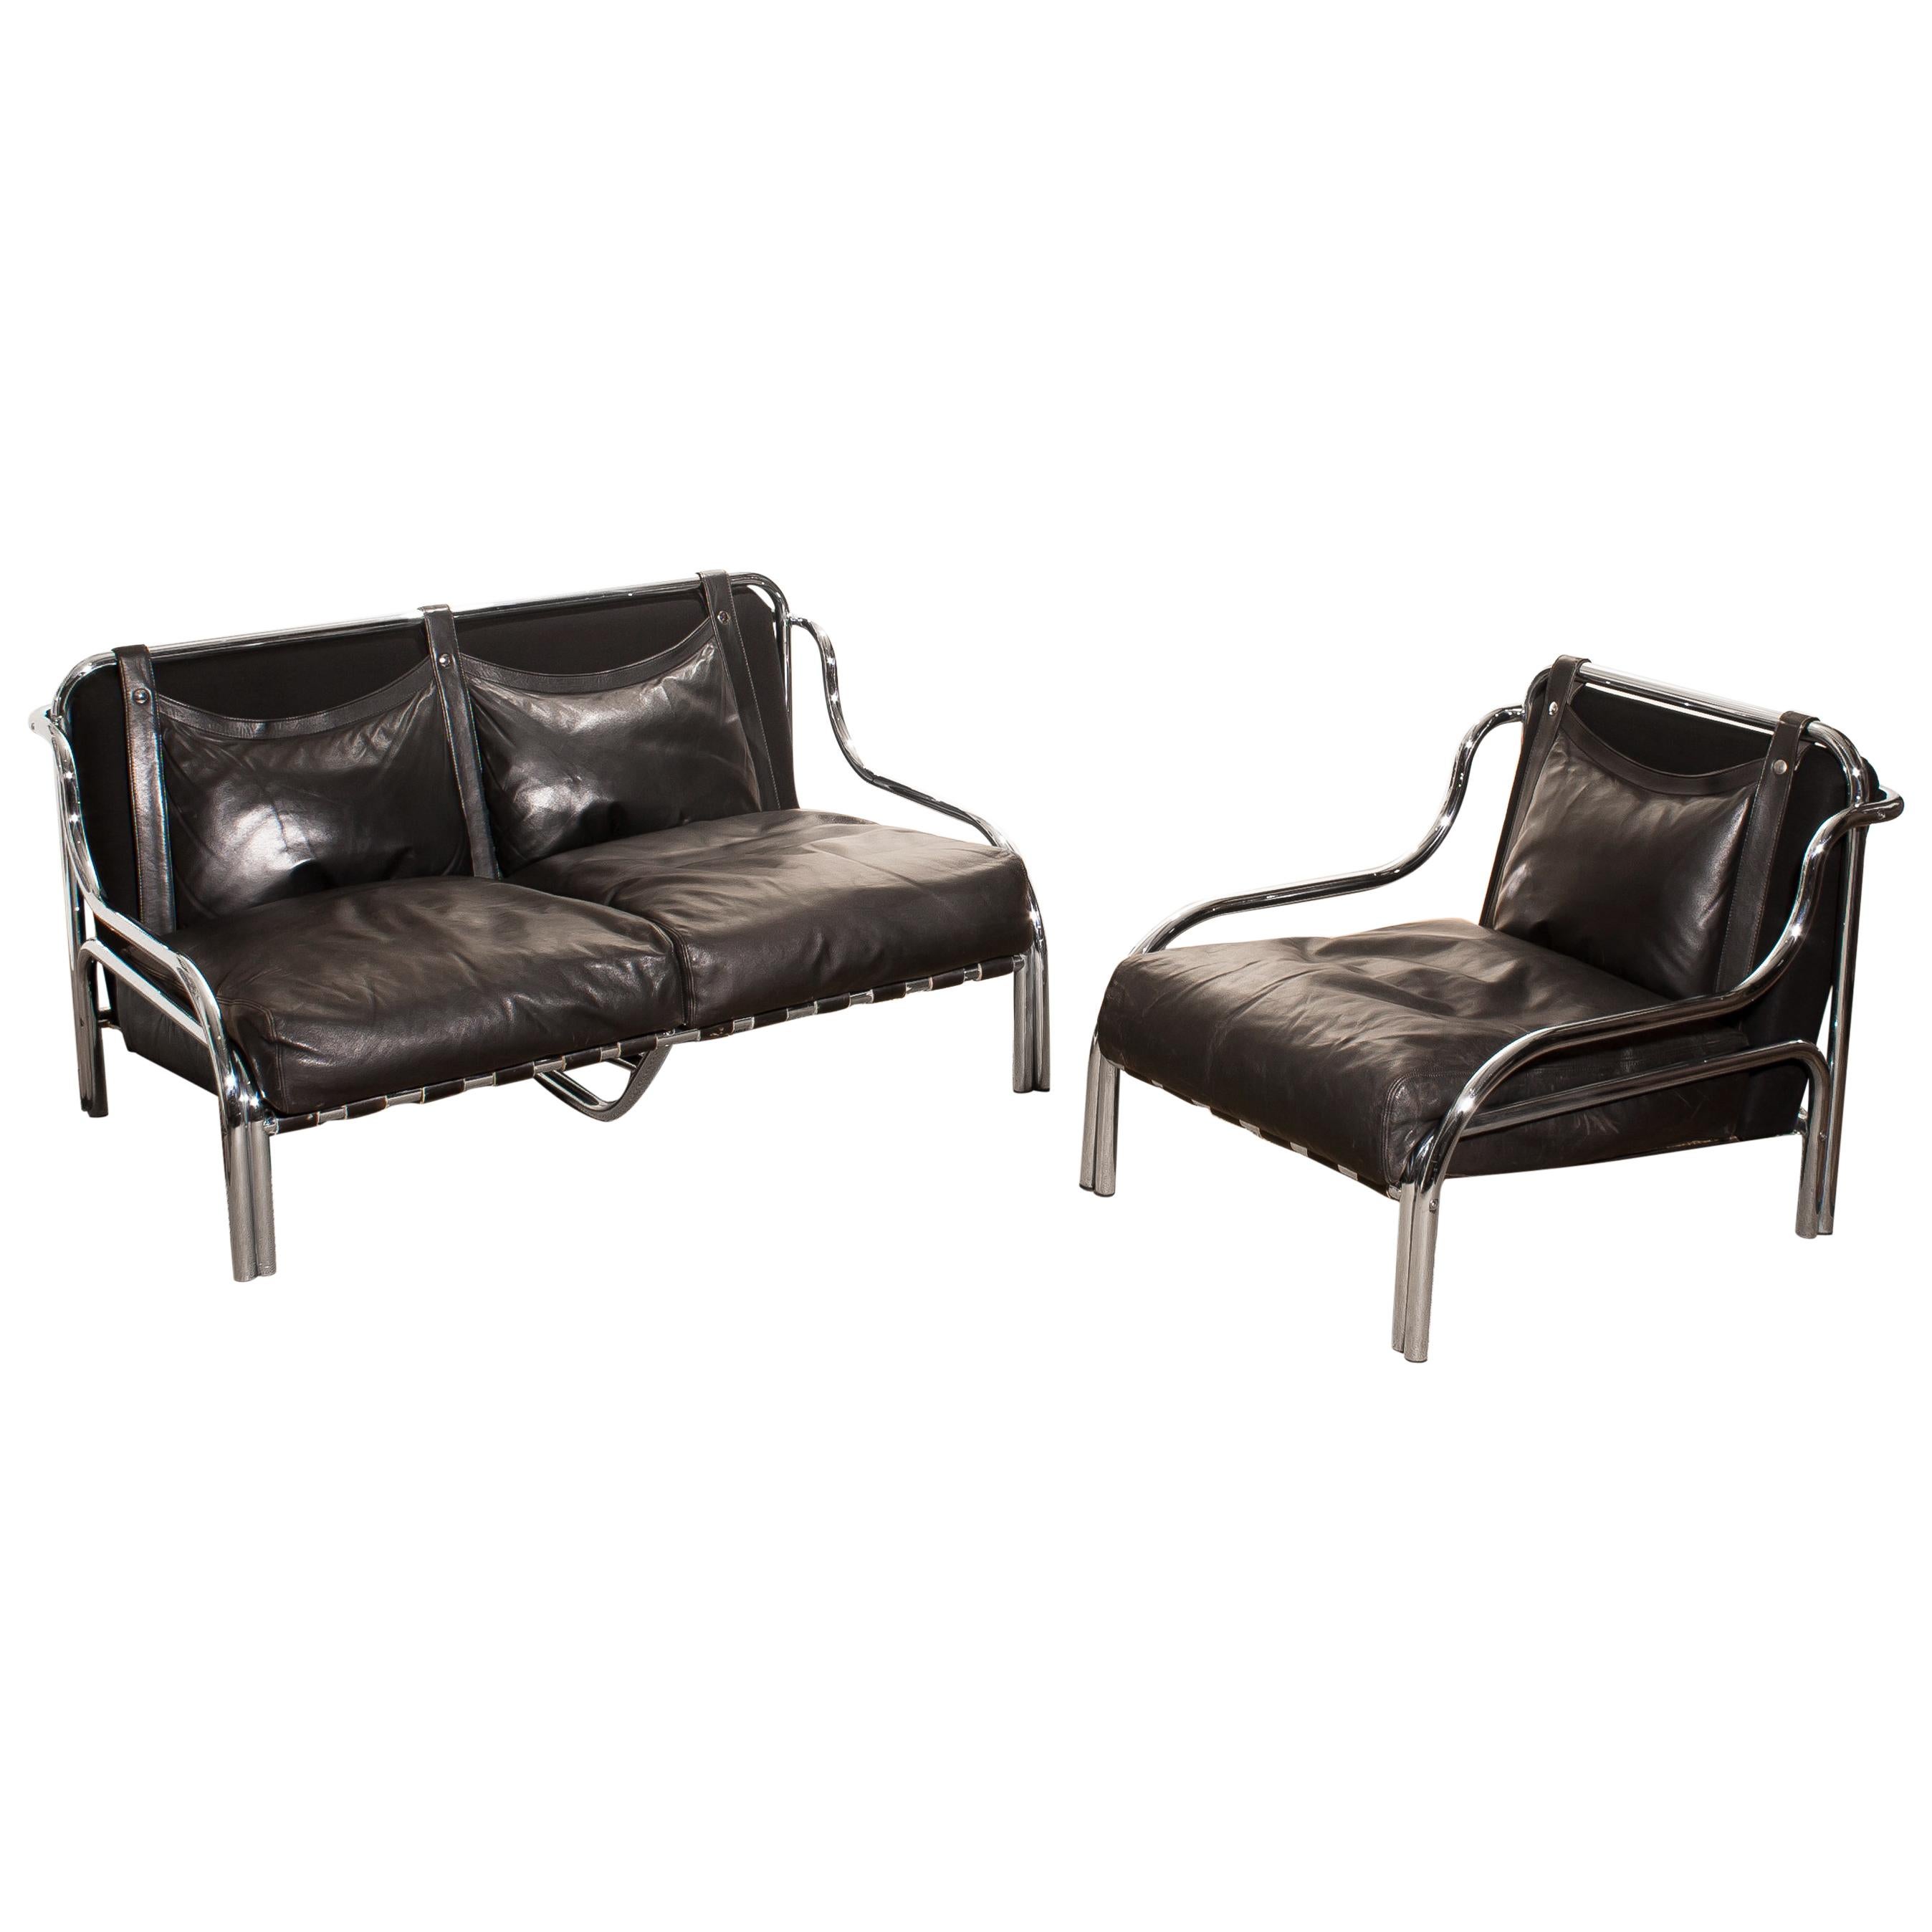 1960s, Leather and Chrome Lounge Sofa and Chair by Gae Aulenti for Poltronova